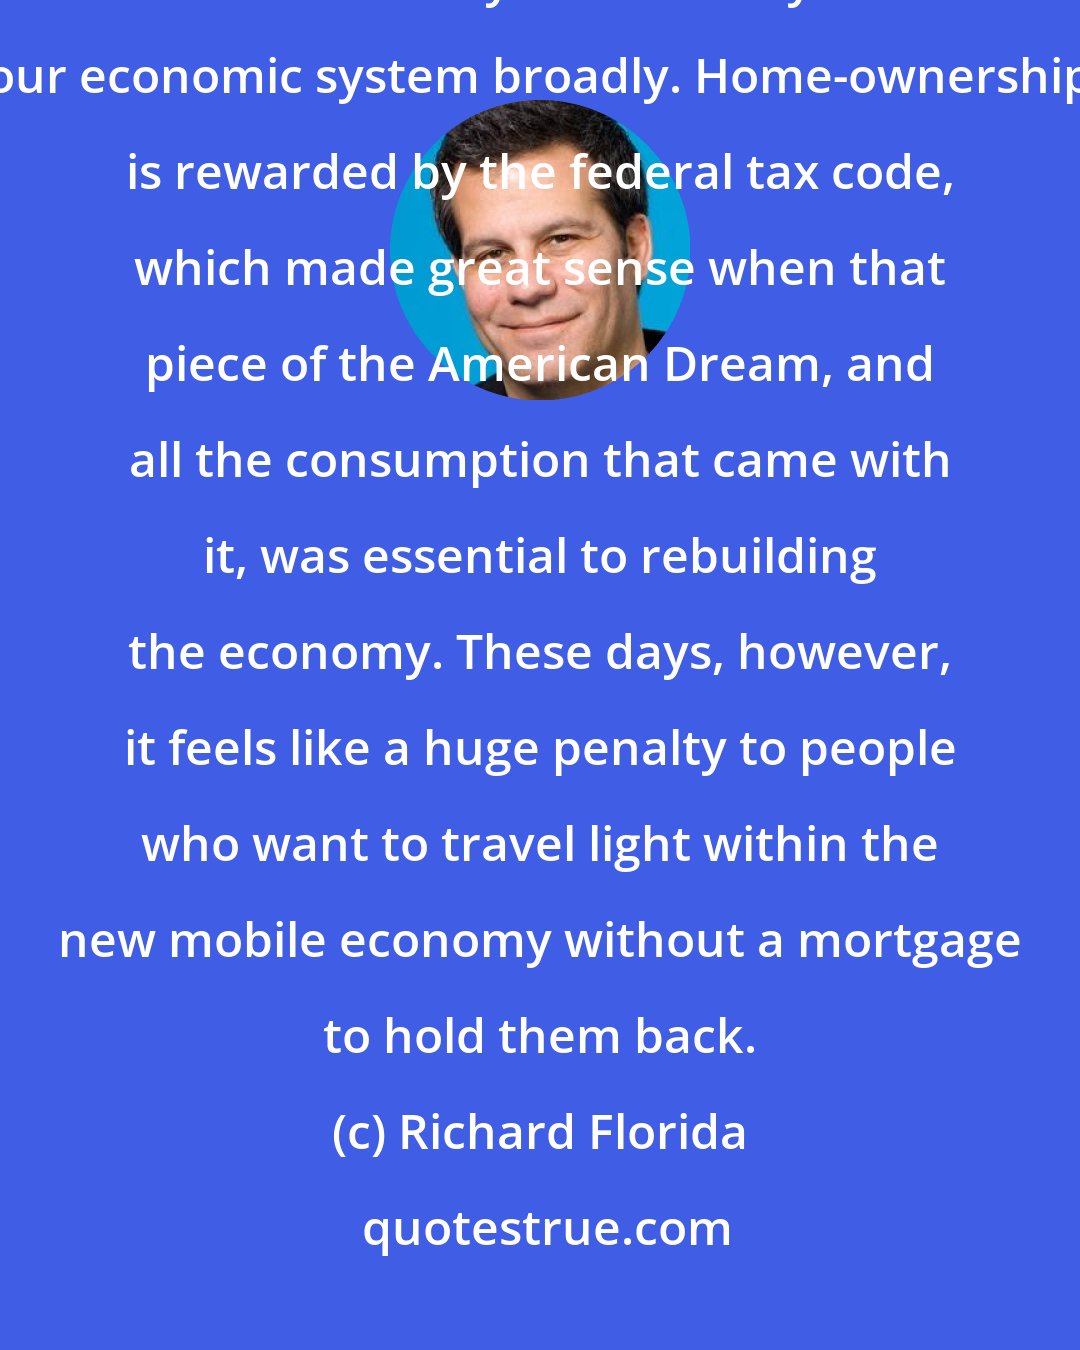 Richard Florida: We need to remake and reinvent our housing system so that it supports the flexibility and mobility of our economic system broadly. Home-ownership is rewarded by the federal tax code, which made great sense when that piece of the American Dream, and all the consumption that came with it, was essential to rebuilding the economy. These days, however, it feels like a huge penalty to people who want to travel light within the new mobile economy without a mortgage to hold them back.